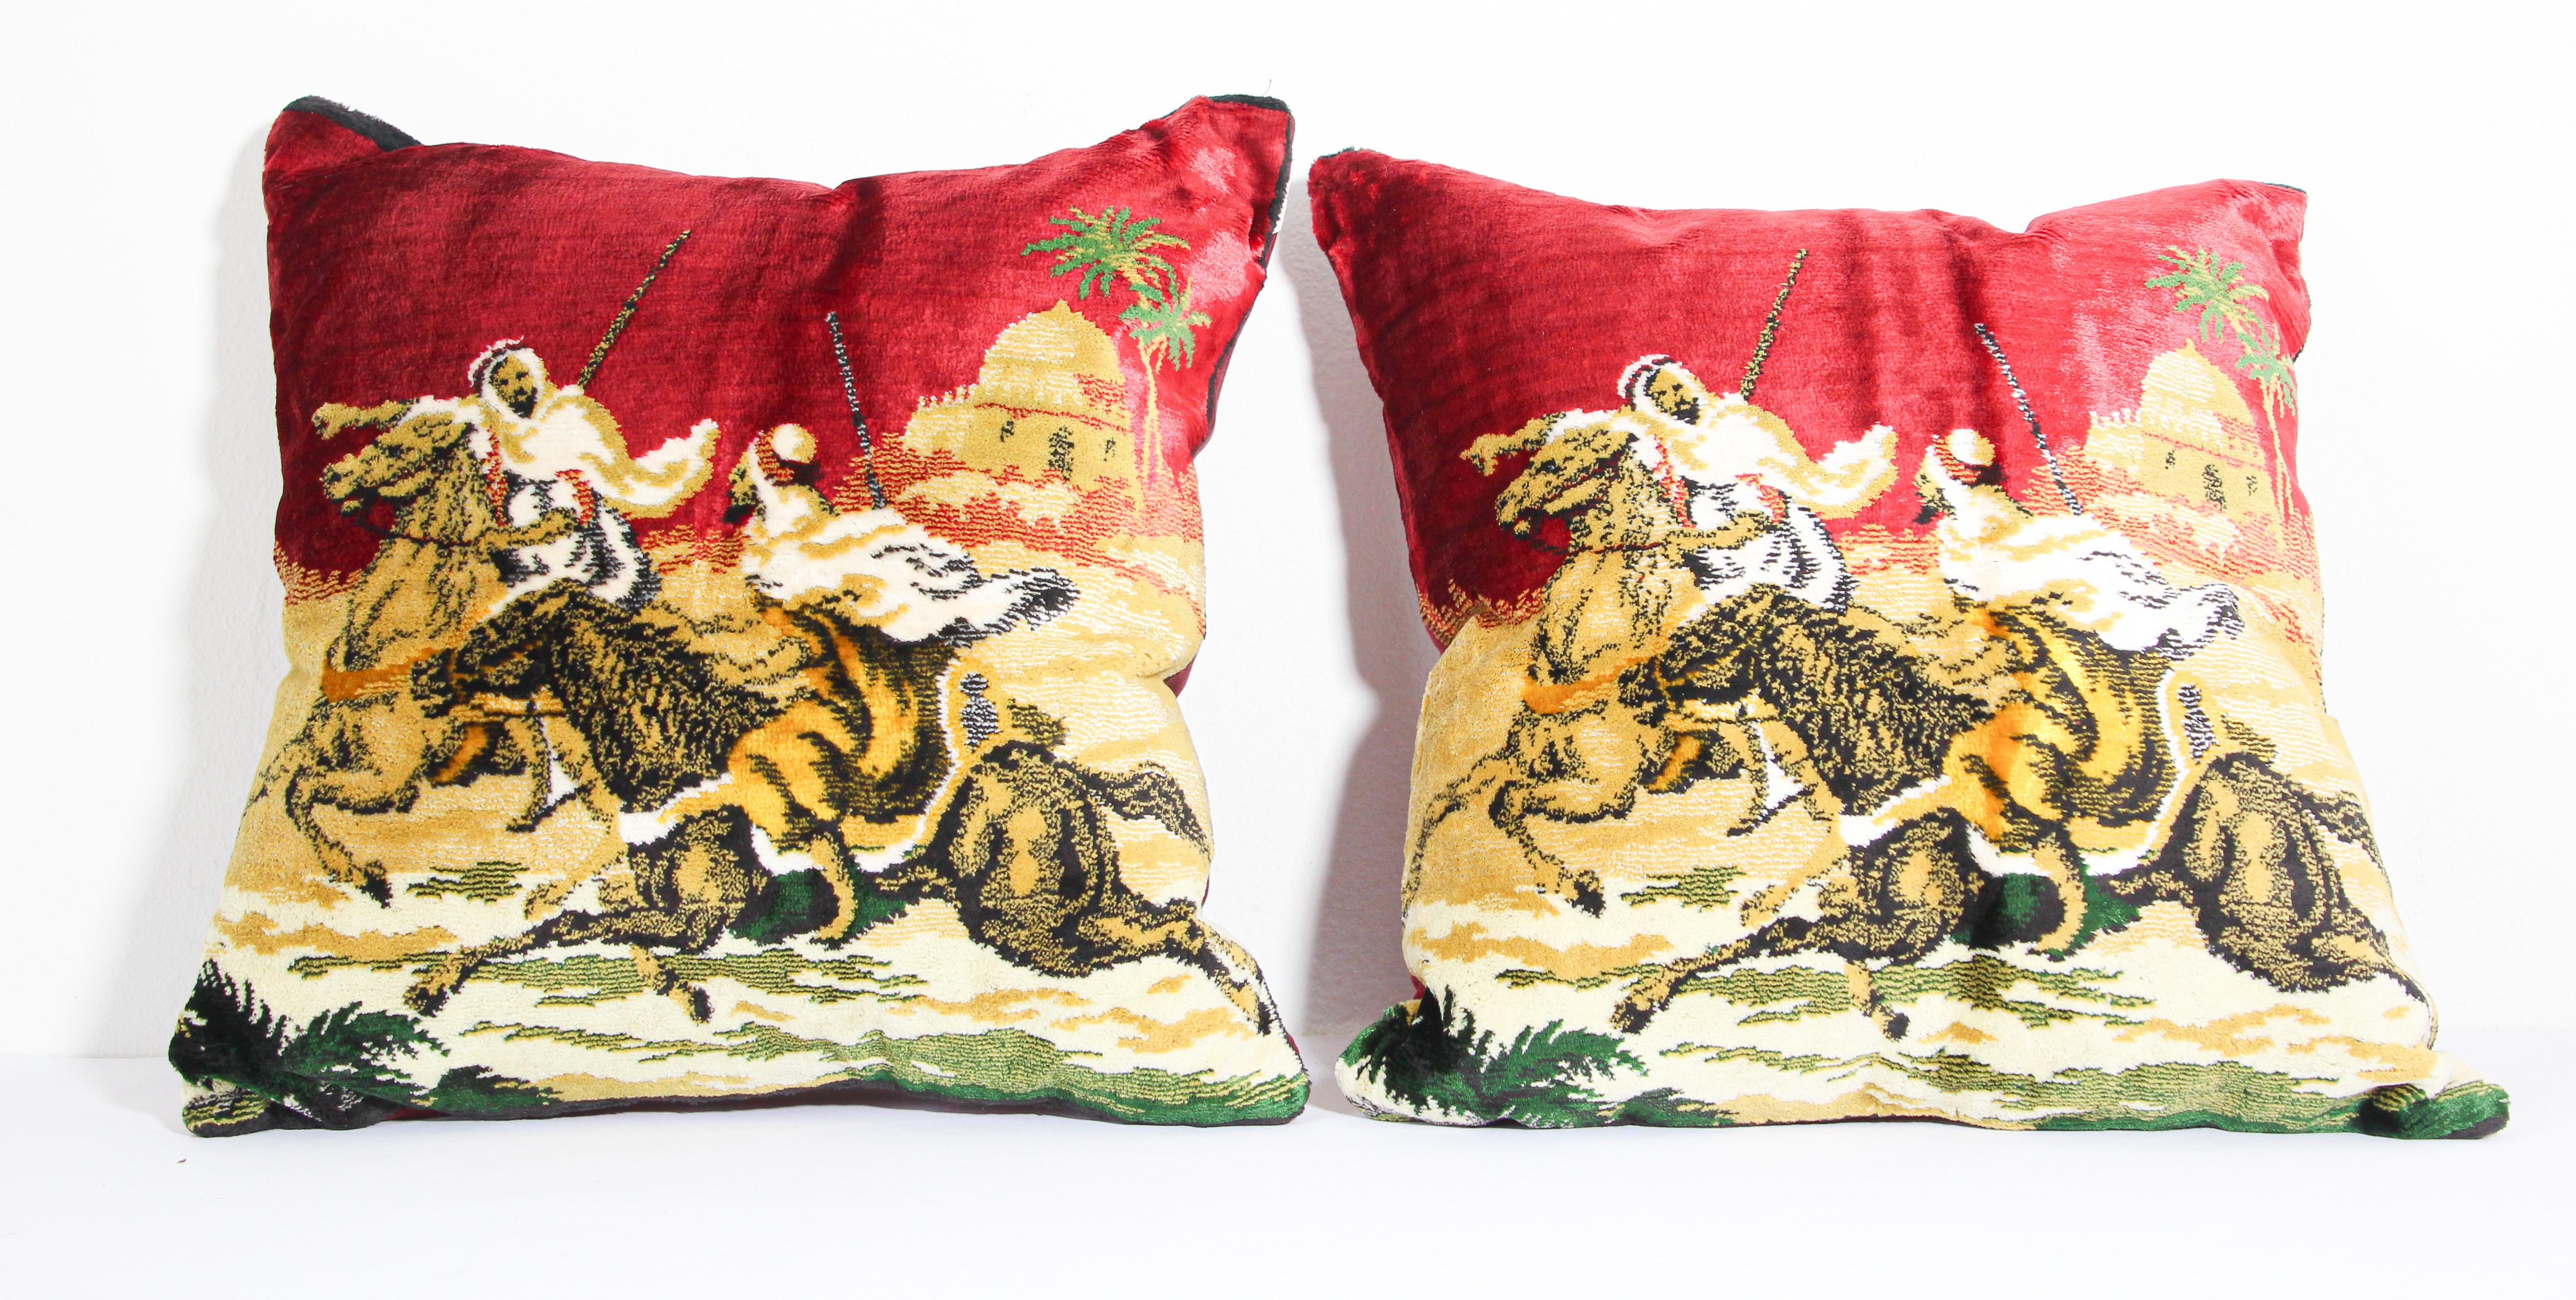 Pair of Moroccan silk velvet pillows with Arabs on horse.
Colors are red, green and yellow, dark burgundy velvet backing.
Pair of handmade Moorish style silk pillows made in Italy.
Made in Italy tag on each pillow.
Never been used.